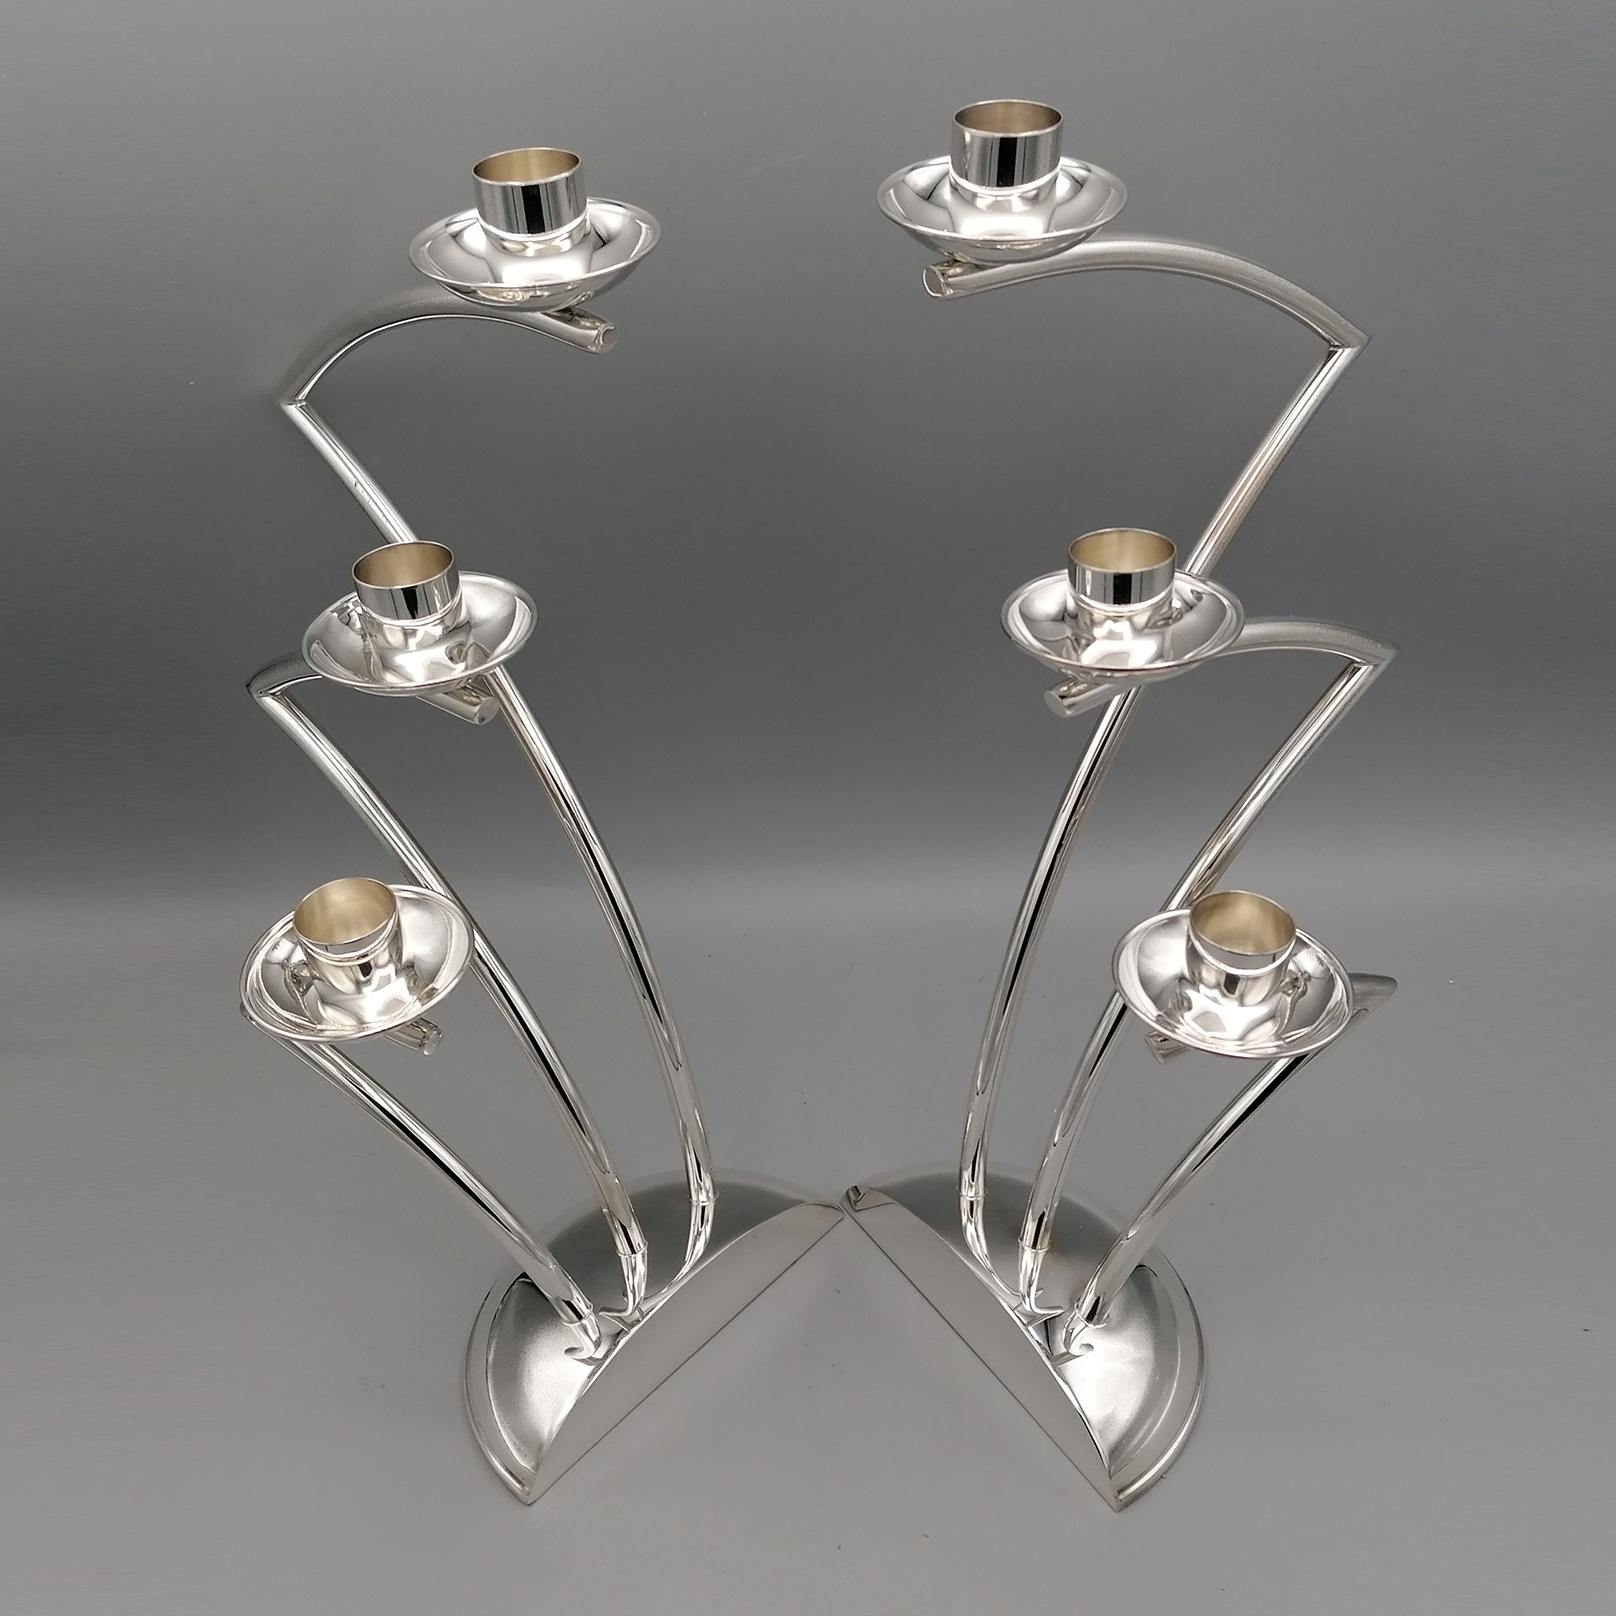 Contemporary 20th Century Italian Sterling Silver Detachable 6-Light Candelabra For Sale